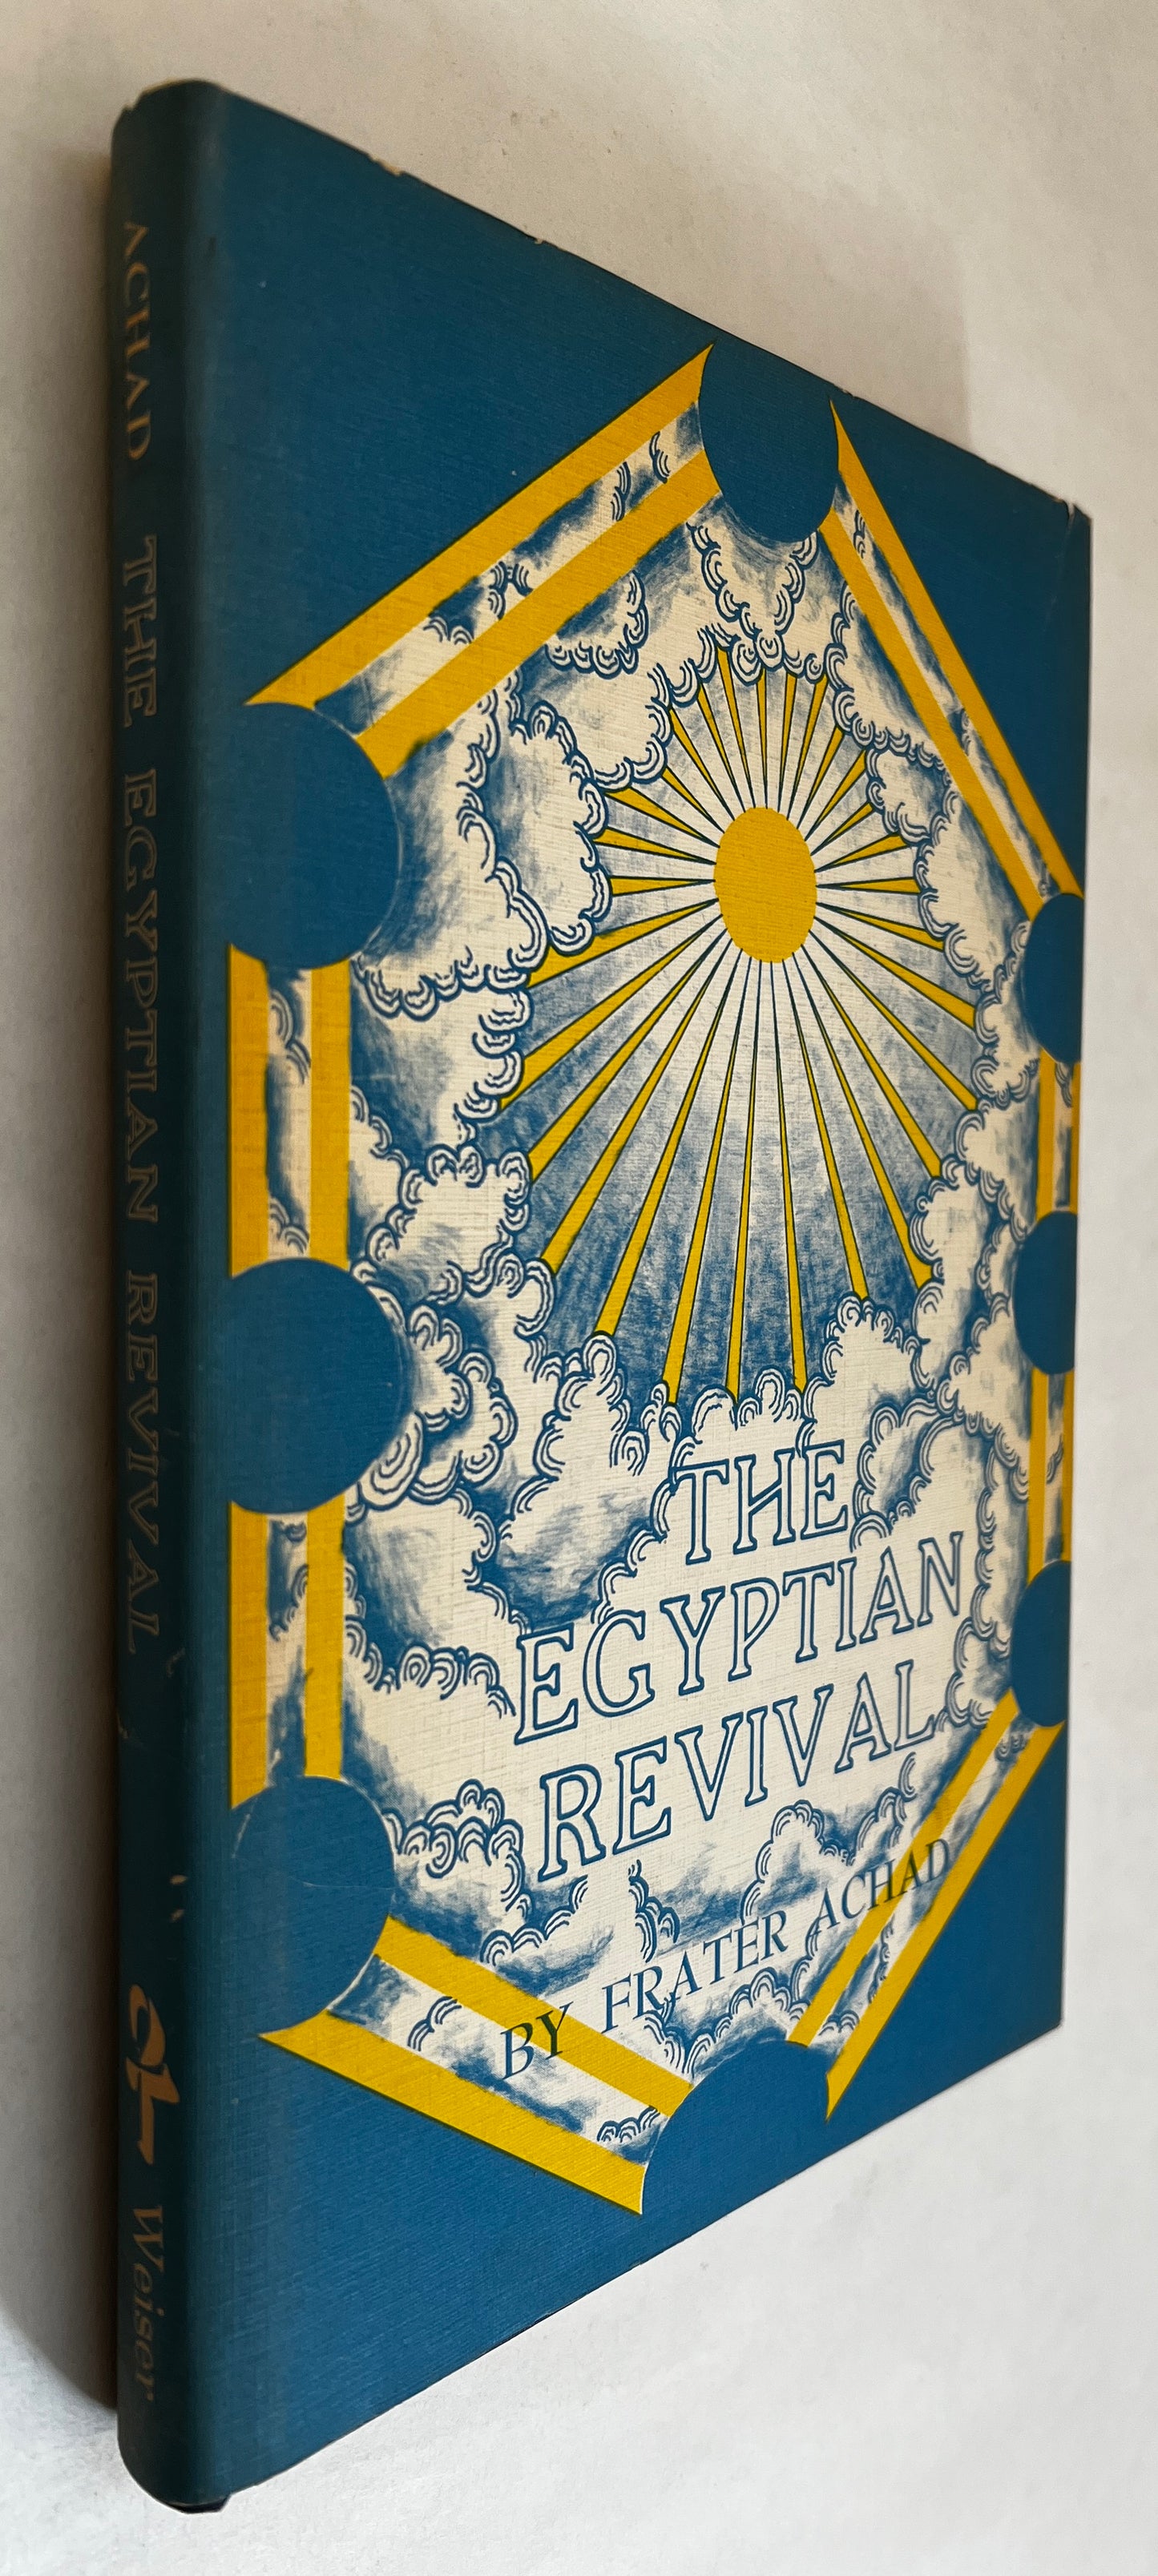 The Egyptian Revival; Or, the Evercoming Son in the Light of the Tarot